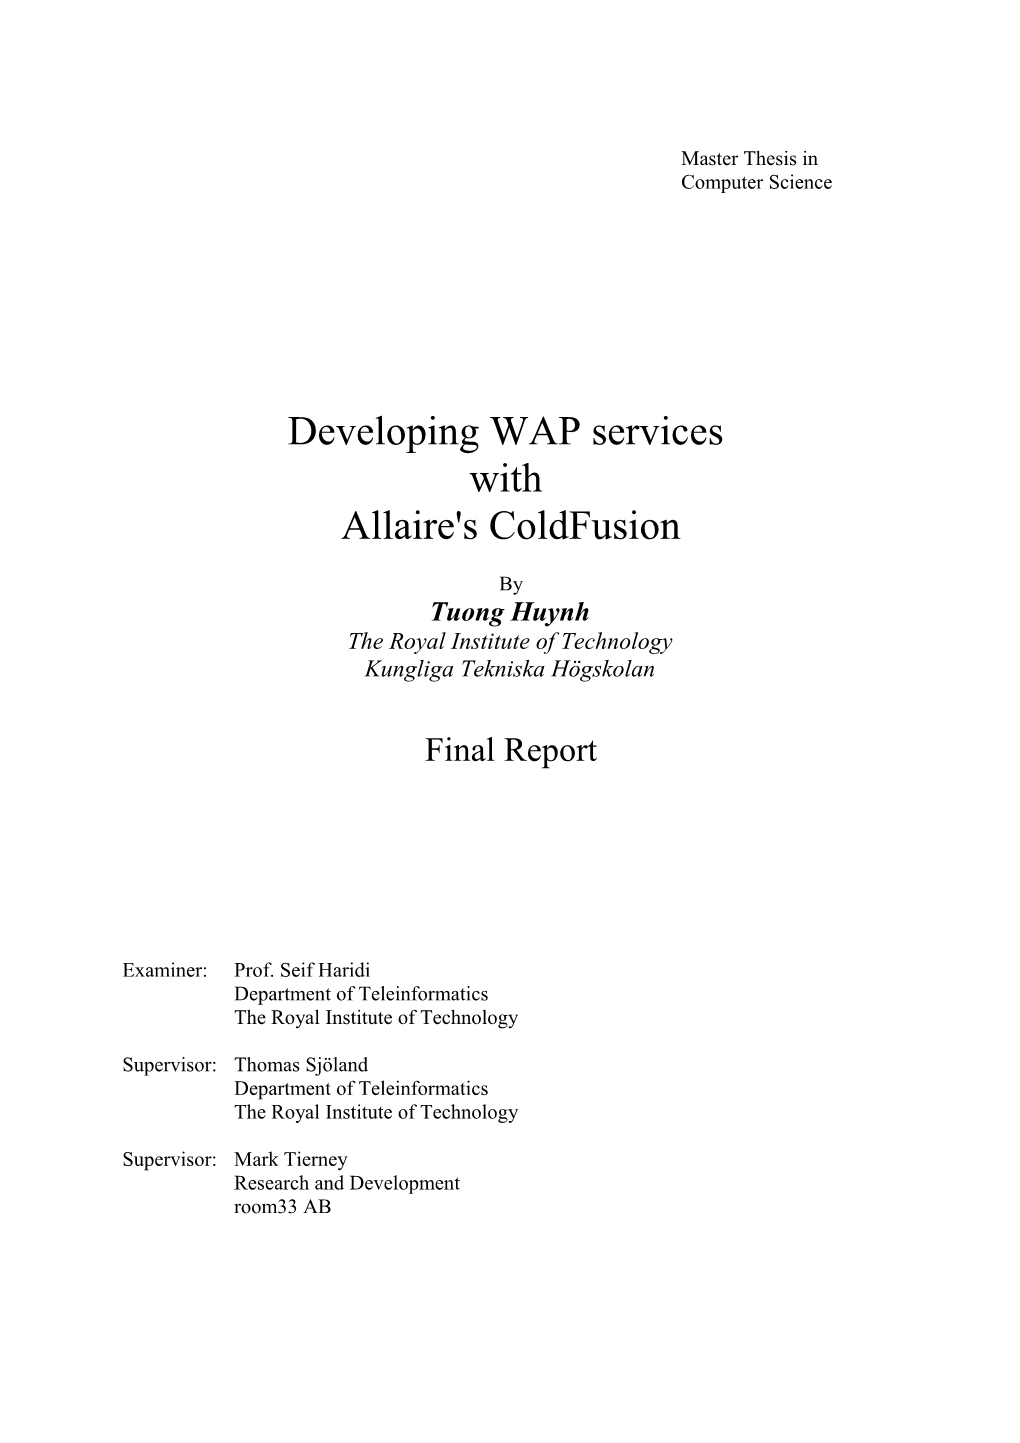 1 Introduction to WAP